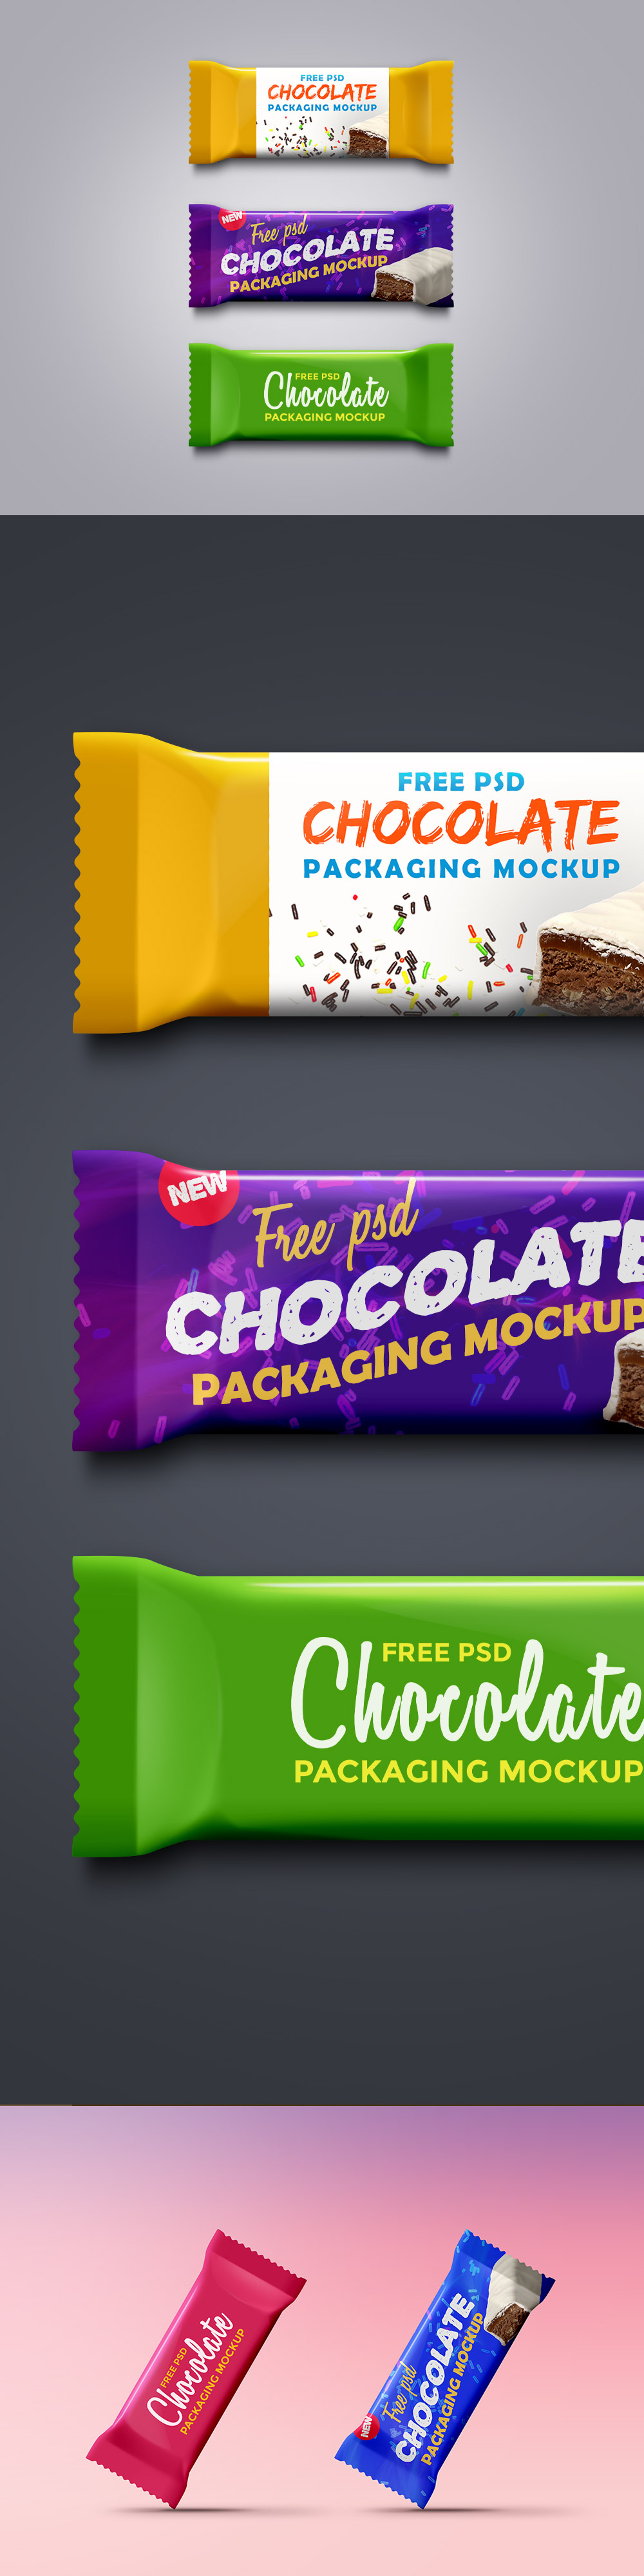 Download Chocolate Packaging MockUp PSD Template - Responsive ...